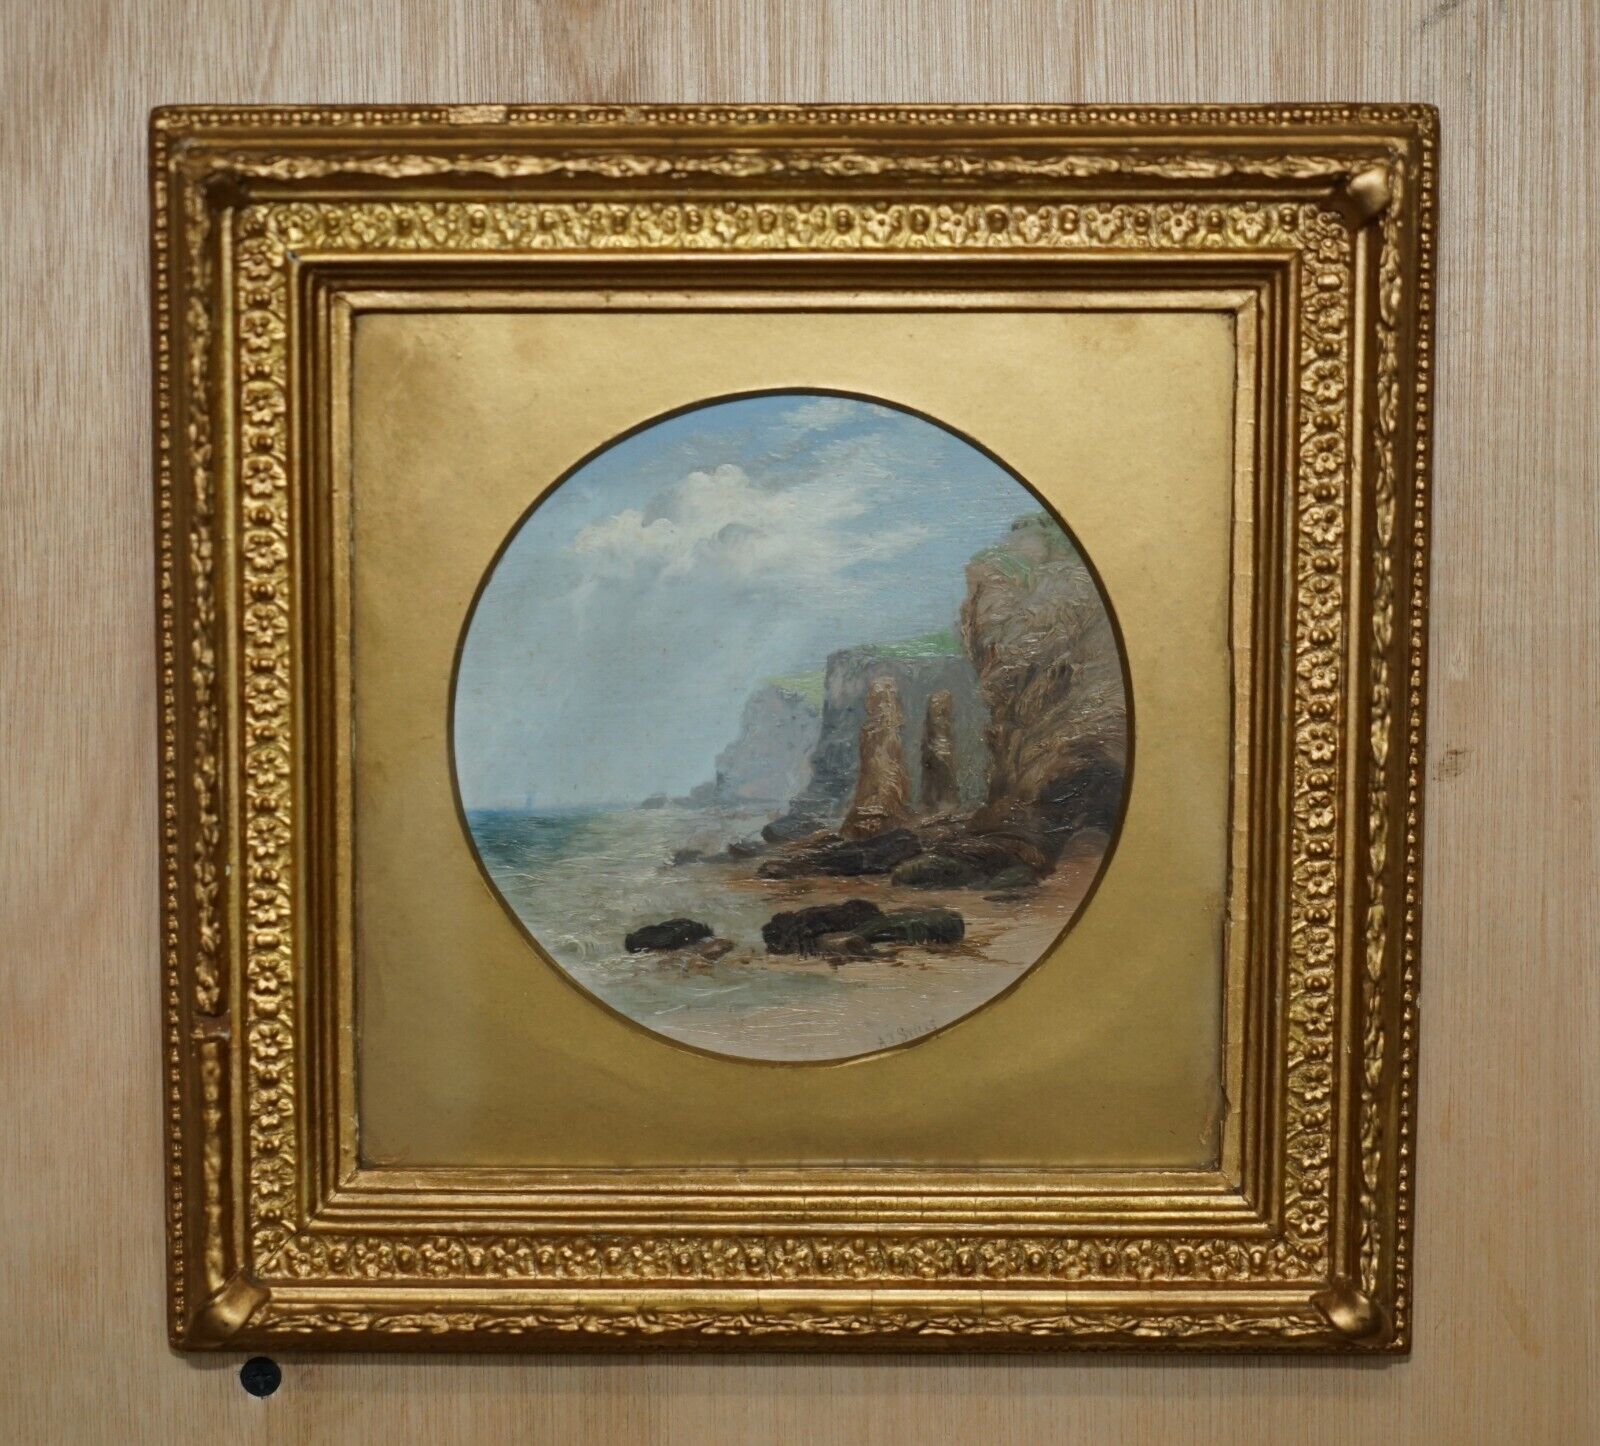 EXQUISITE A J STICKS SIGNED SMALL OIL PAINTING FRAME BY S L NIELSEN SEA & CLIFFS